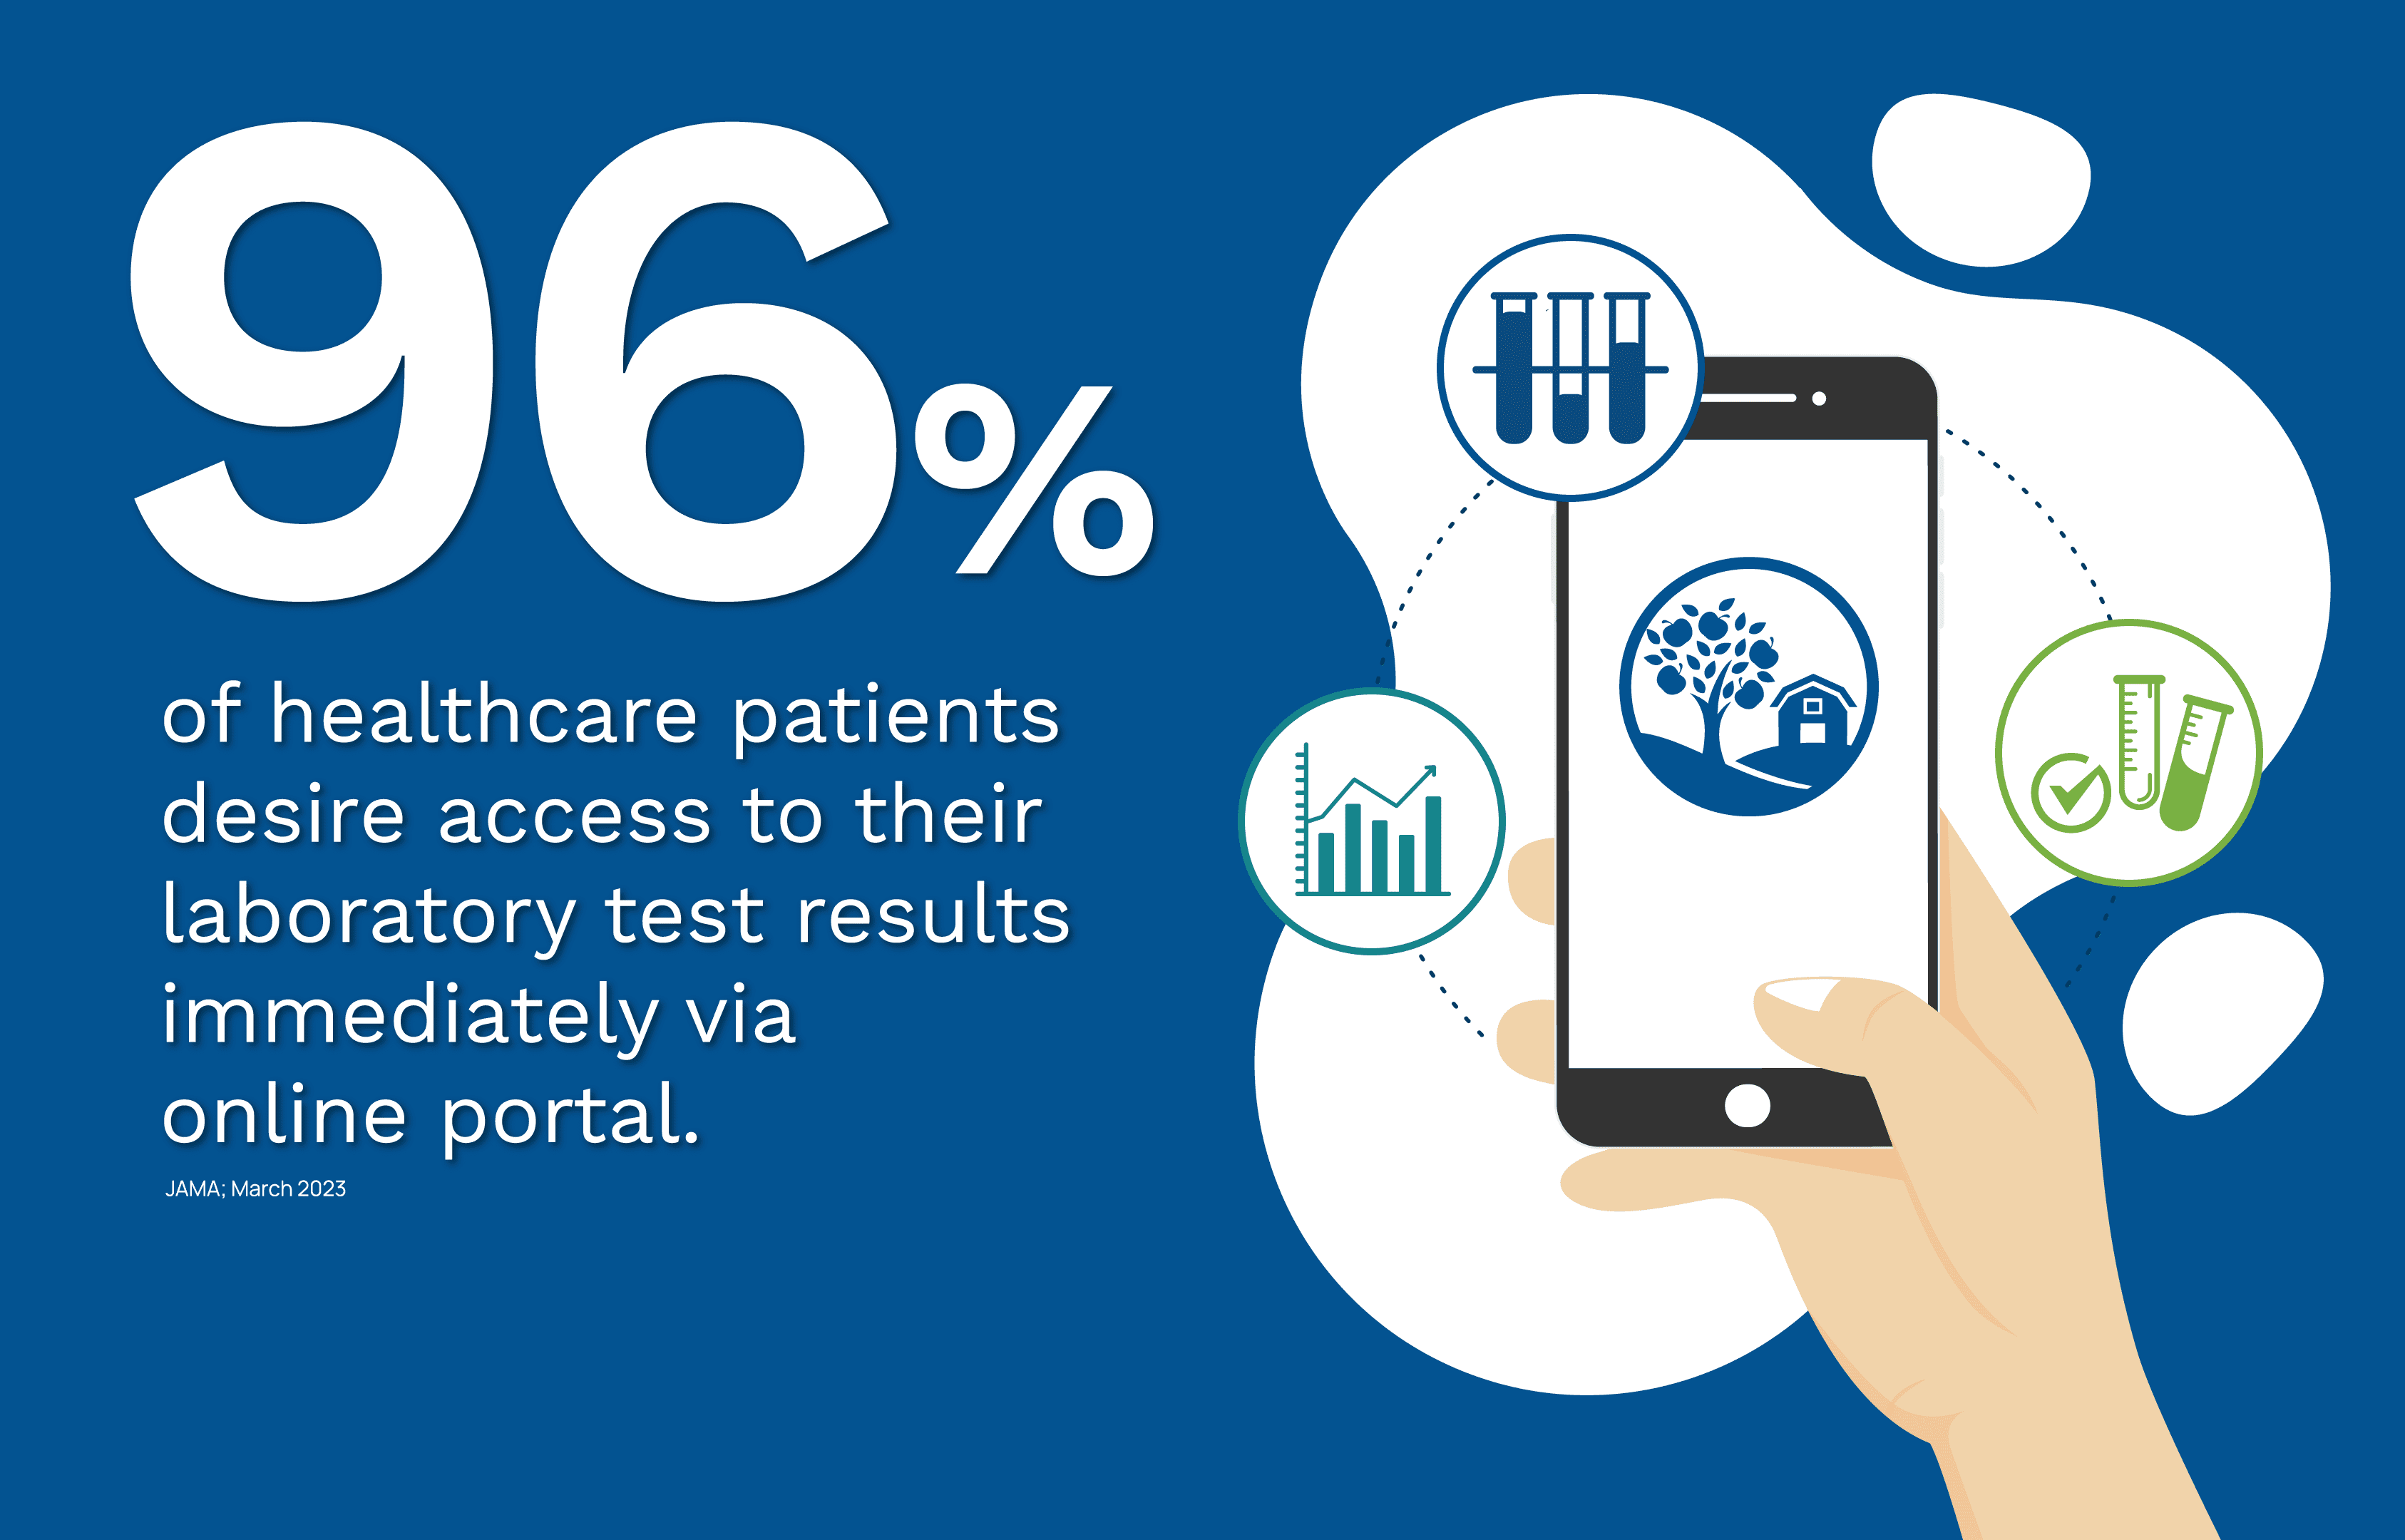 Patient Portal Access as an Interoperability Tool